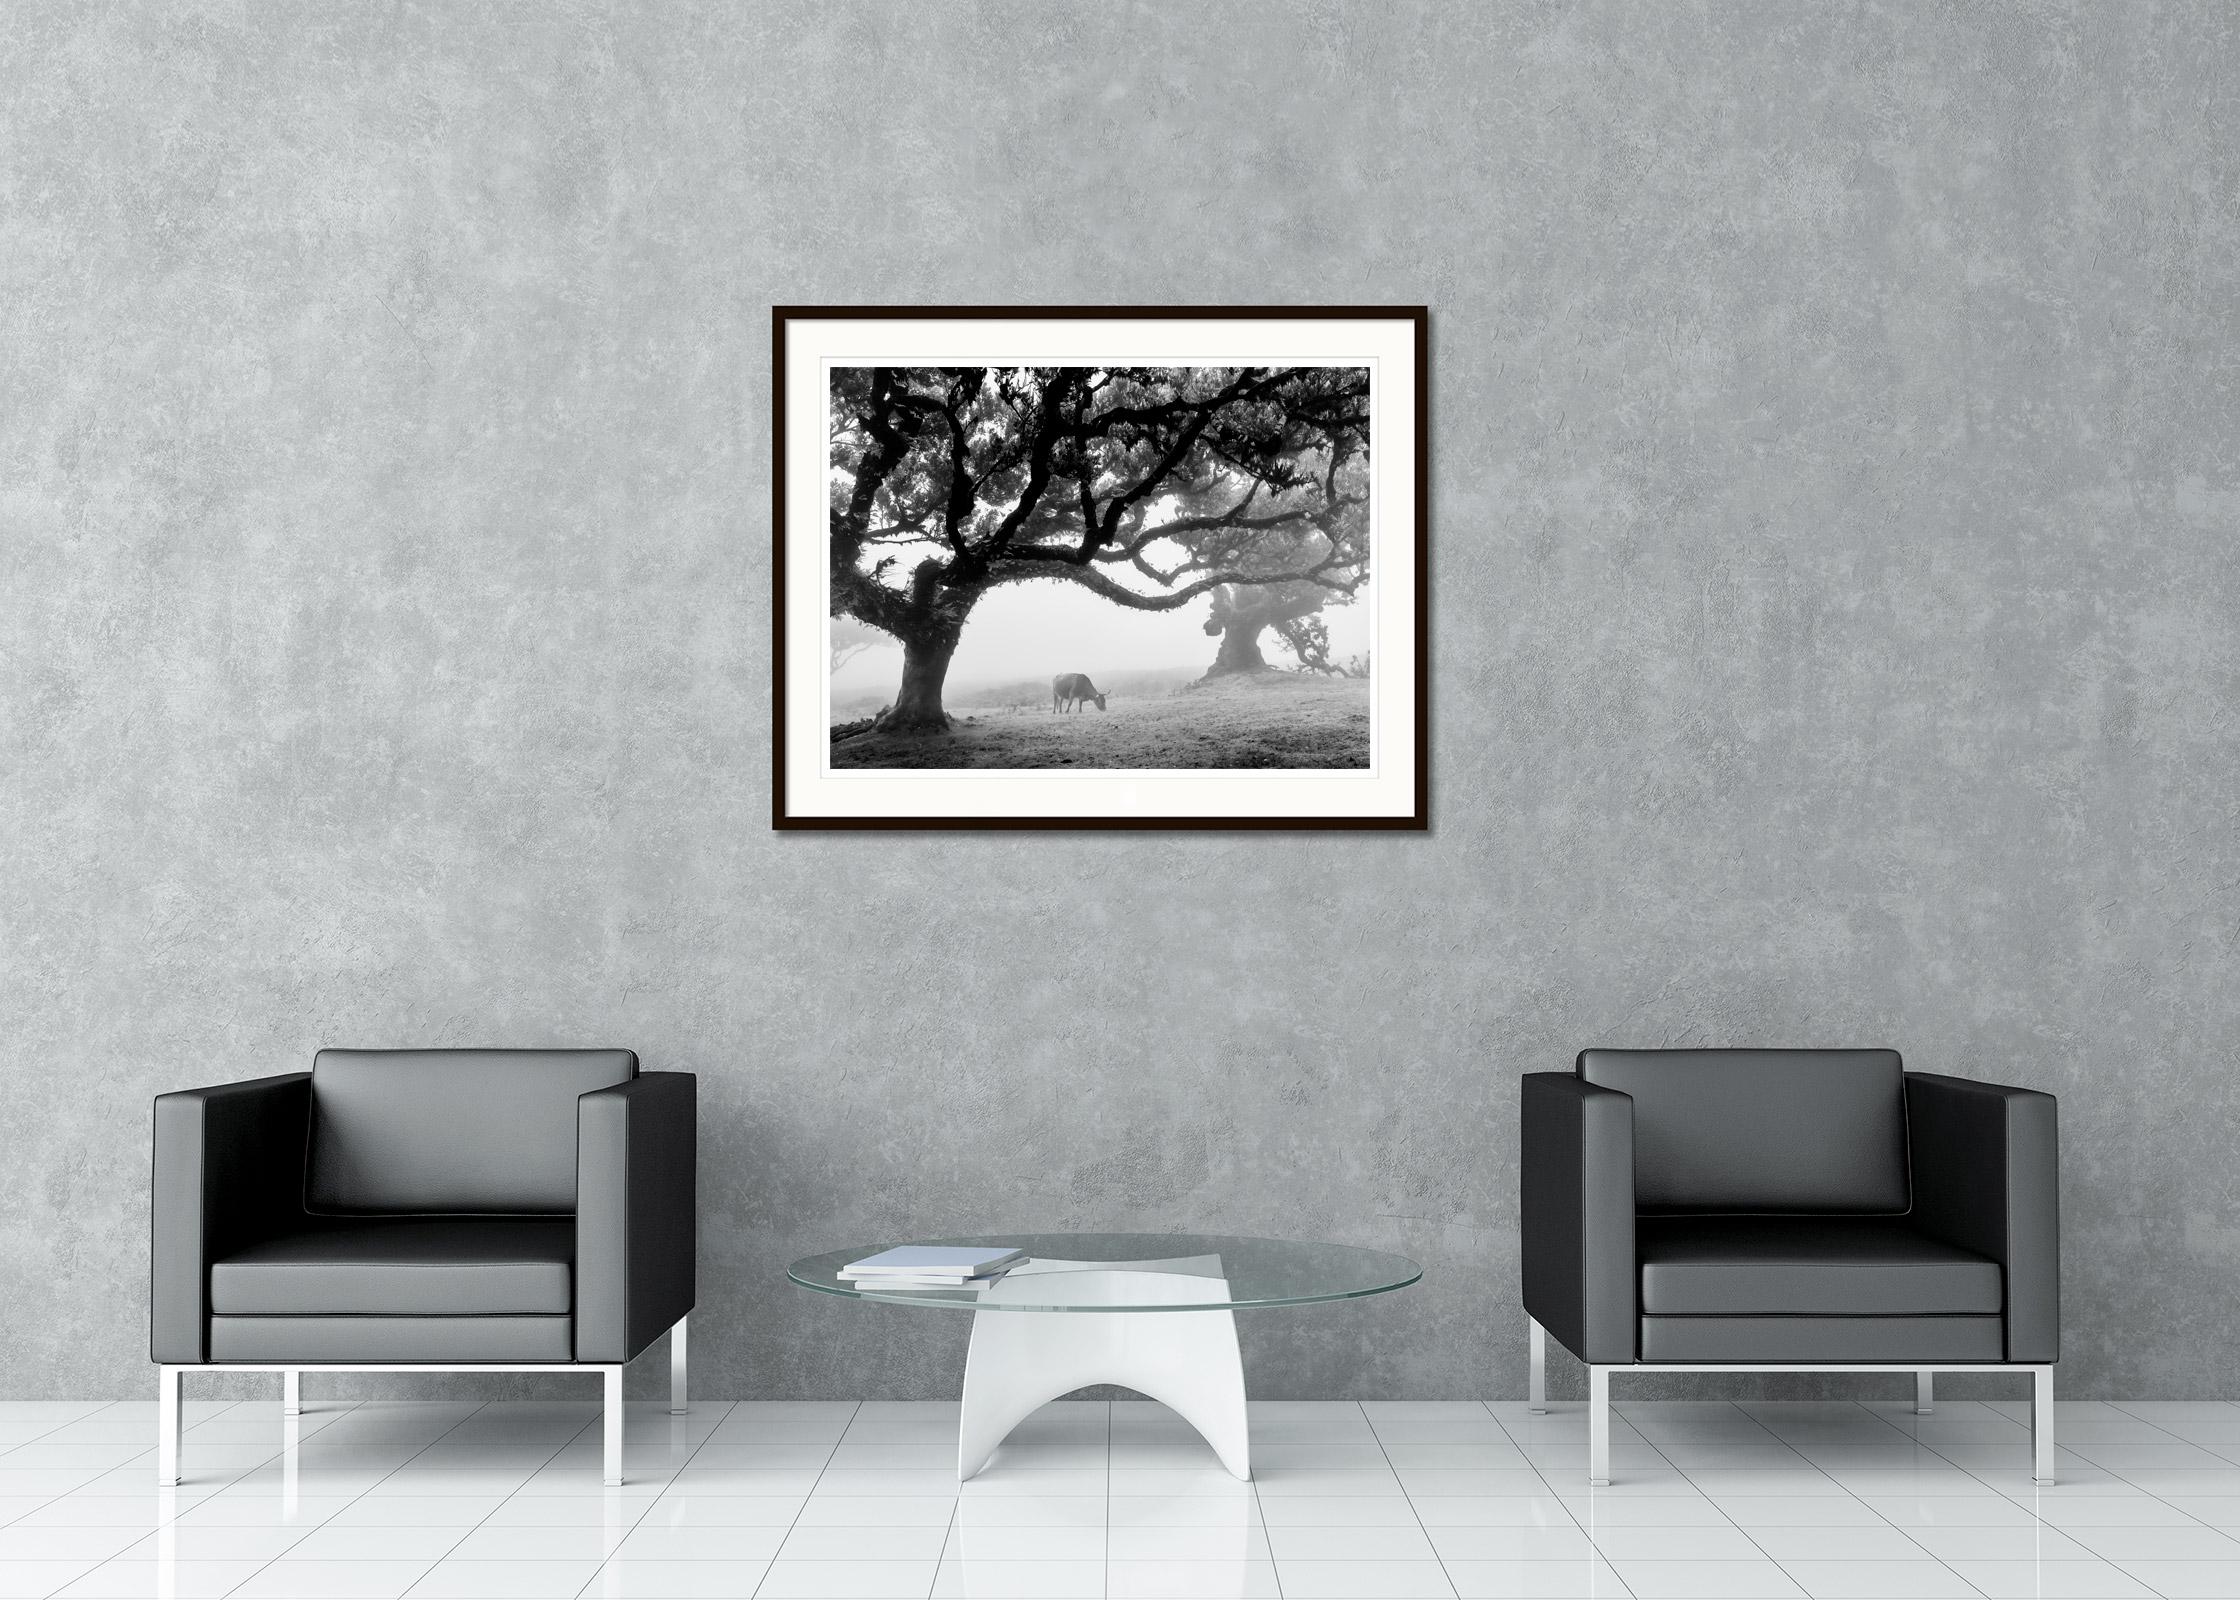 Black and white fine art landscape photography. Fairy forest of madeira in the fog with cows and crooked trees, Fanal, Portugal. Archival pigment ink print as part of a limited edition of 7. All Gerald Berghammer prints are made to order in limited